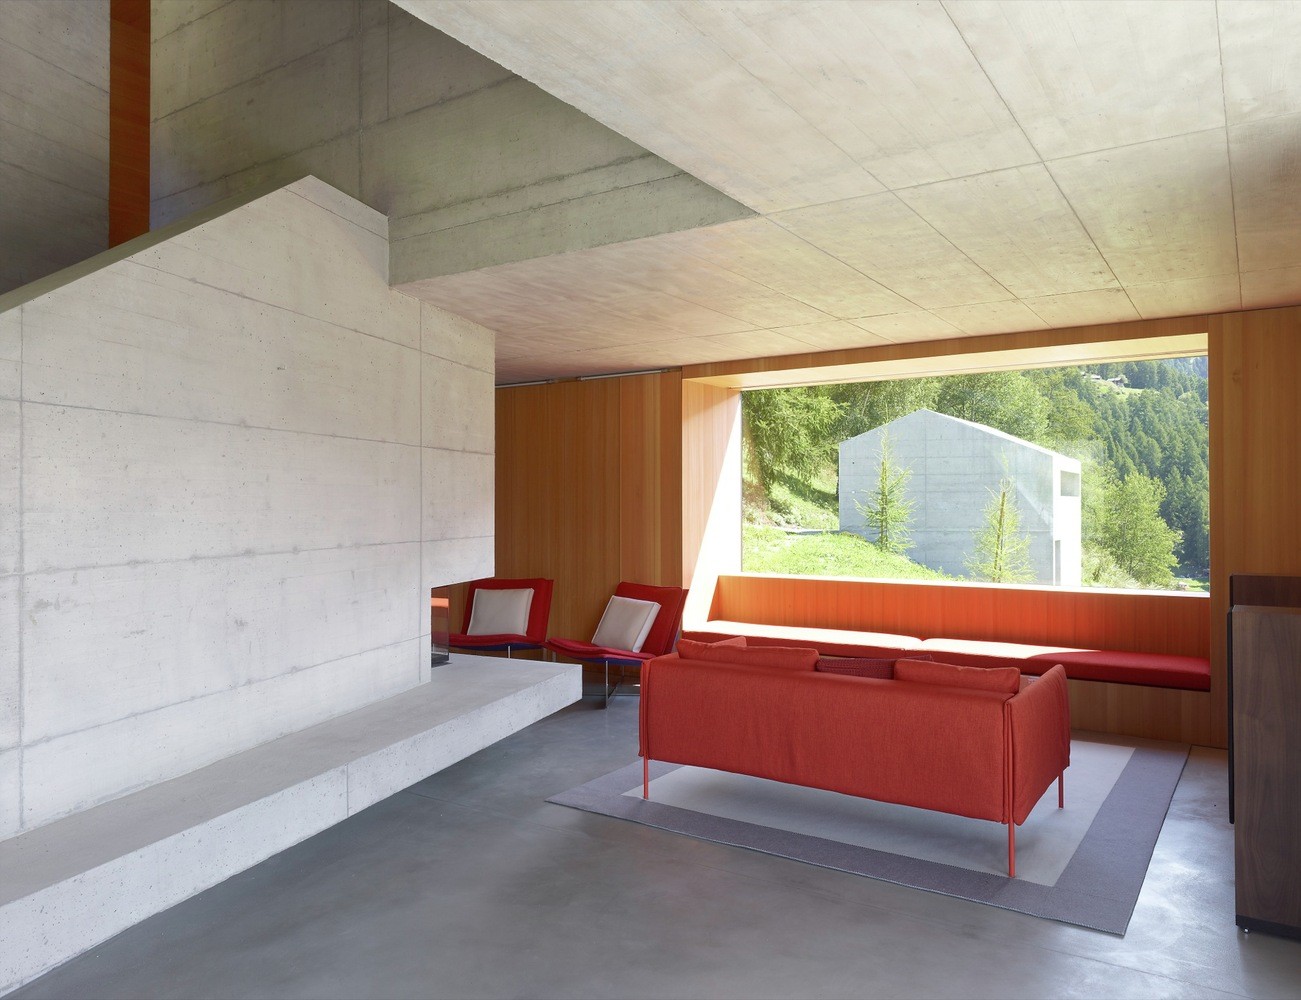 Concrete Cottage Covered with Wood Cladding in the Val d'Hérens (5)